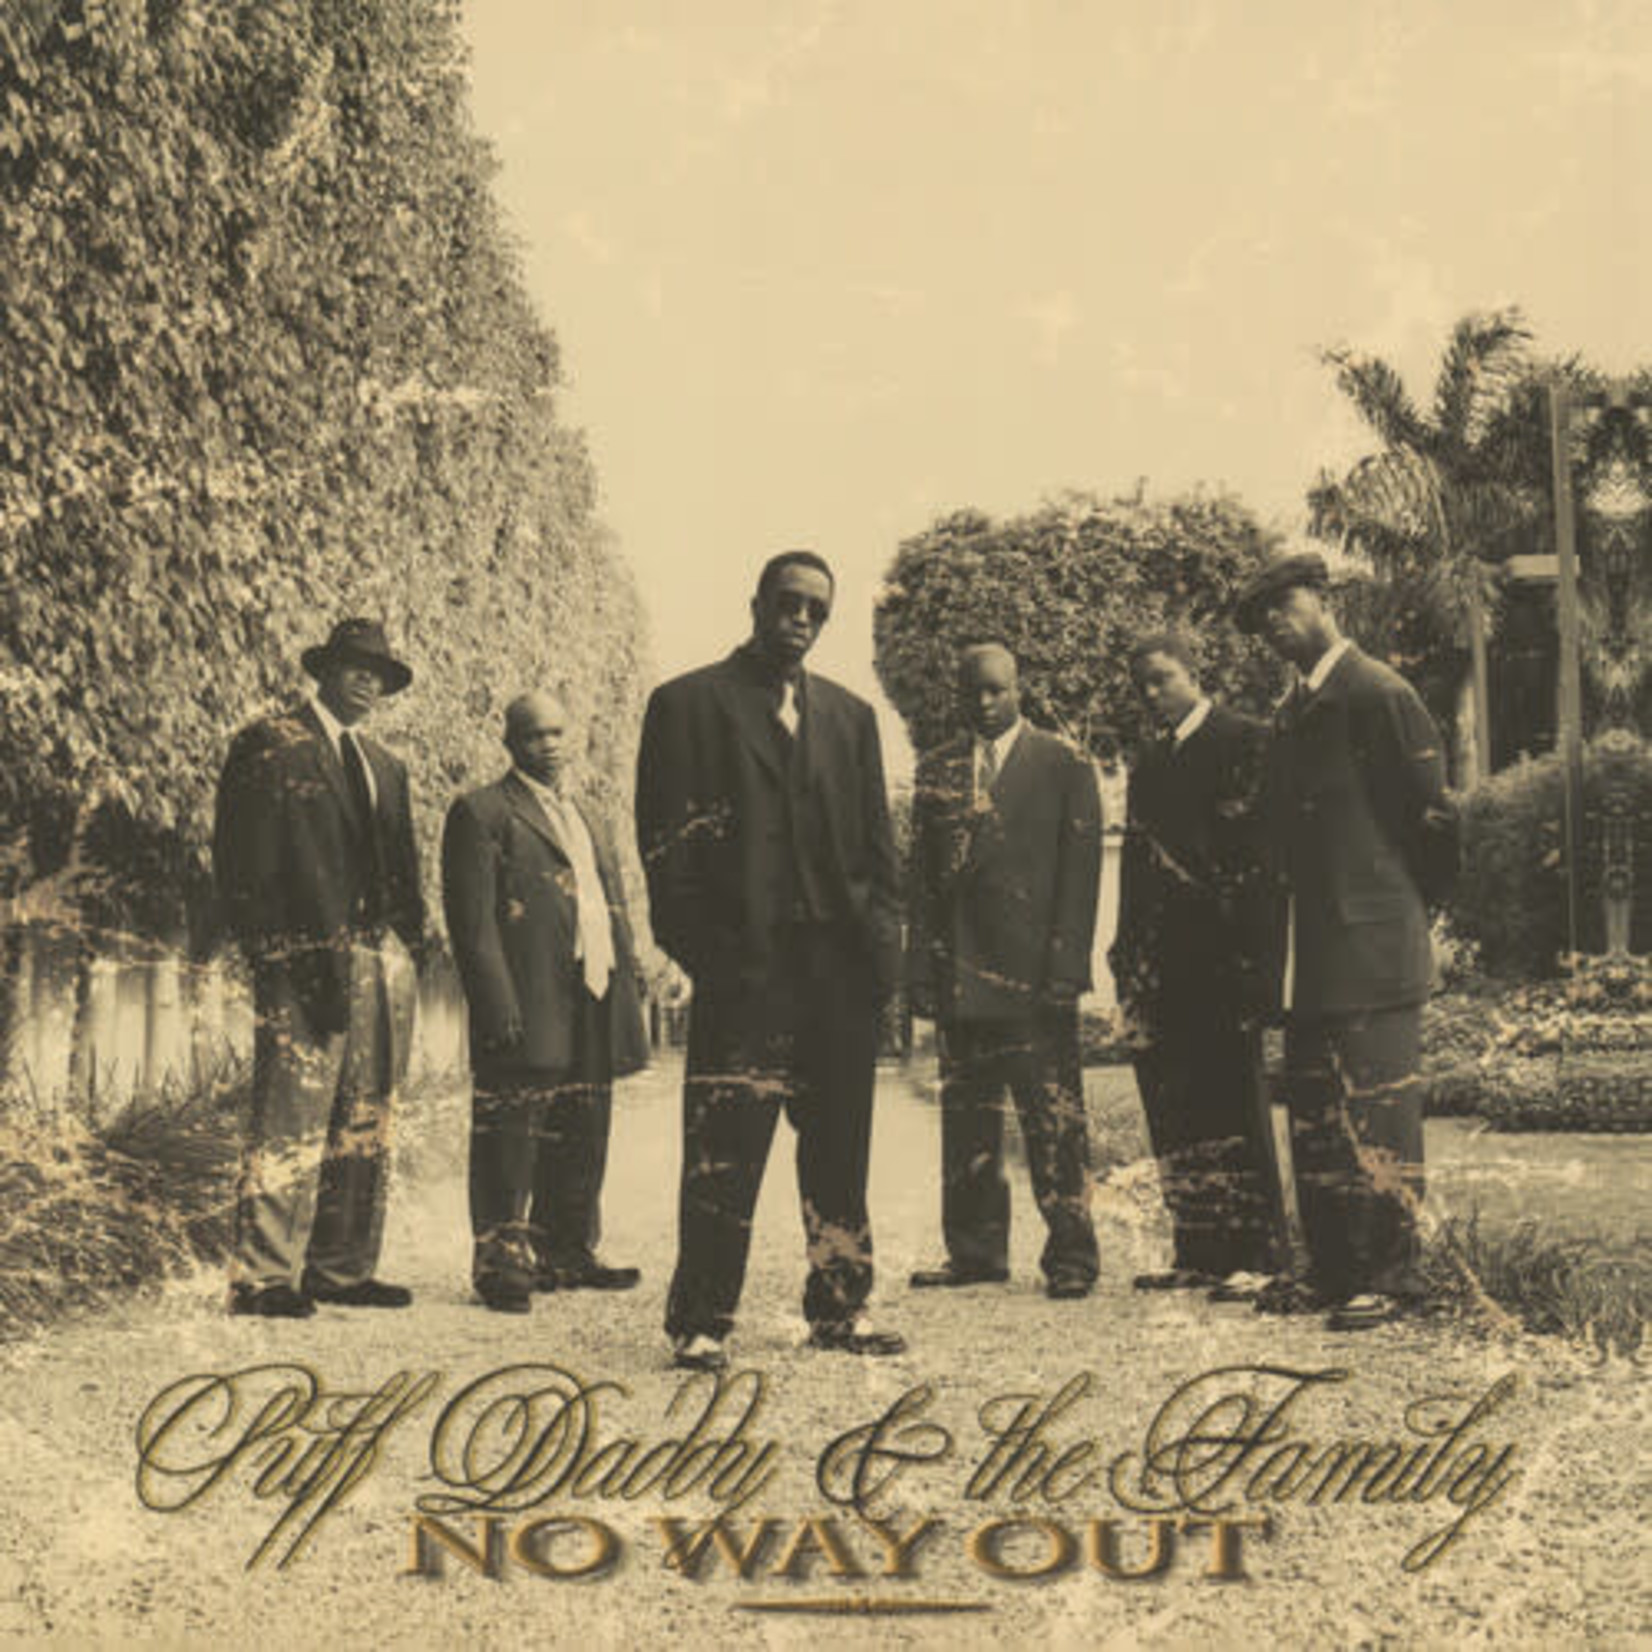 Bad Boy Puff Daddy & The Family - No Way Out (2LP) [White]